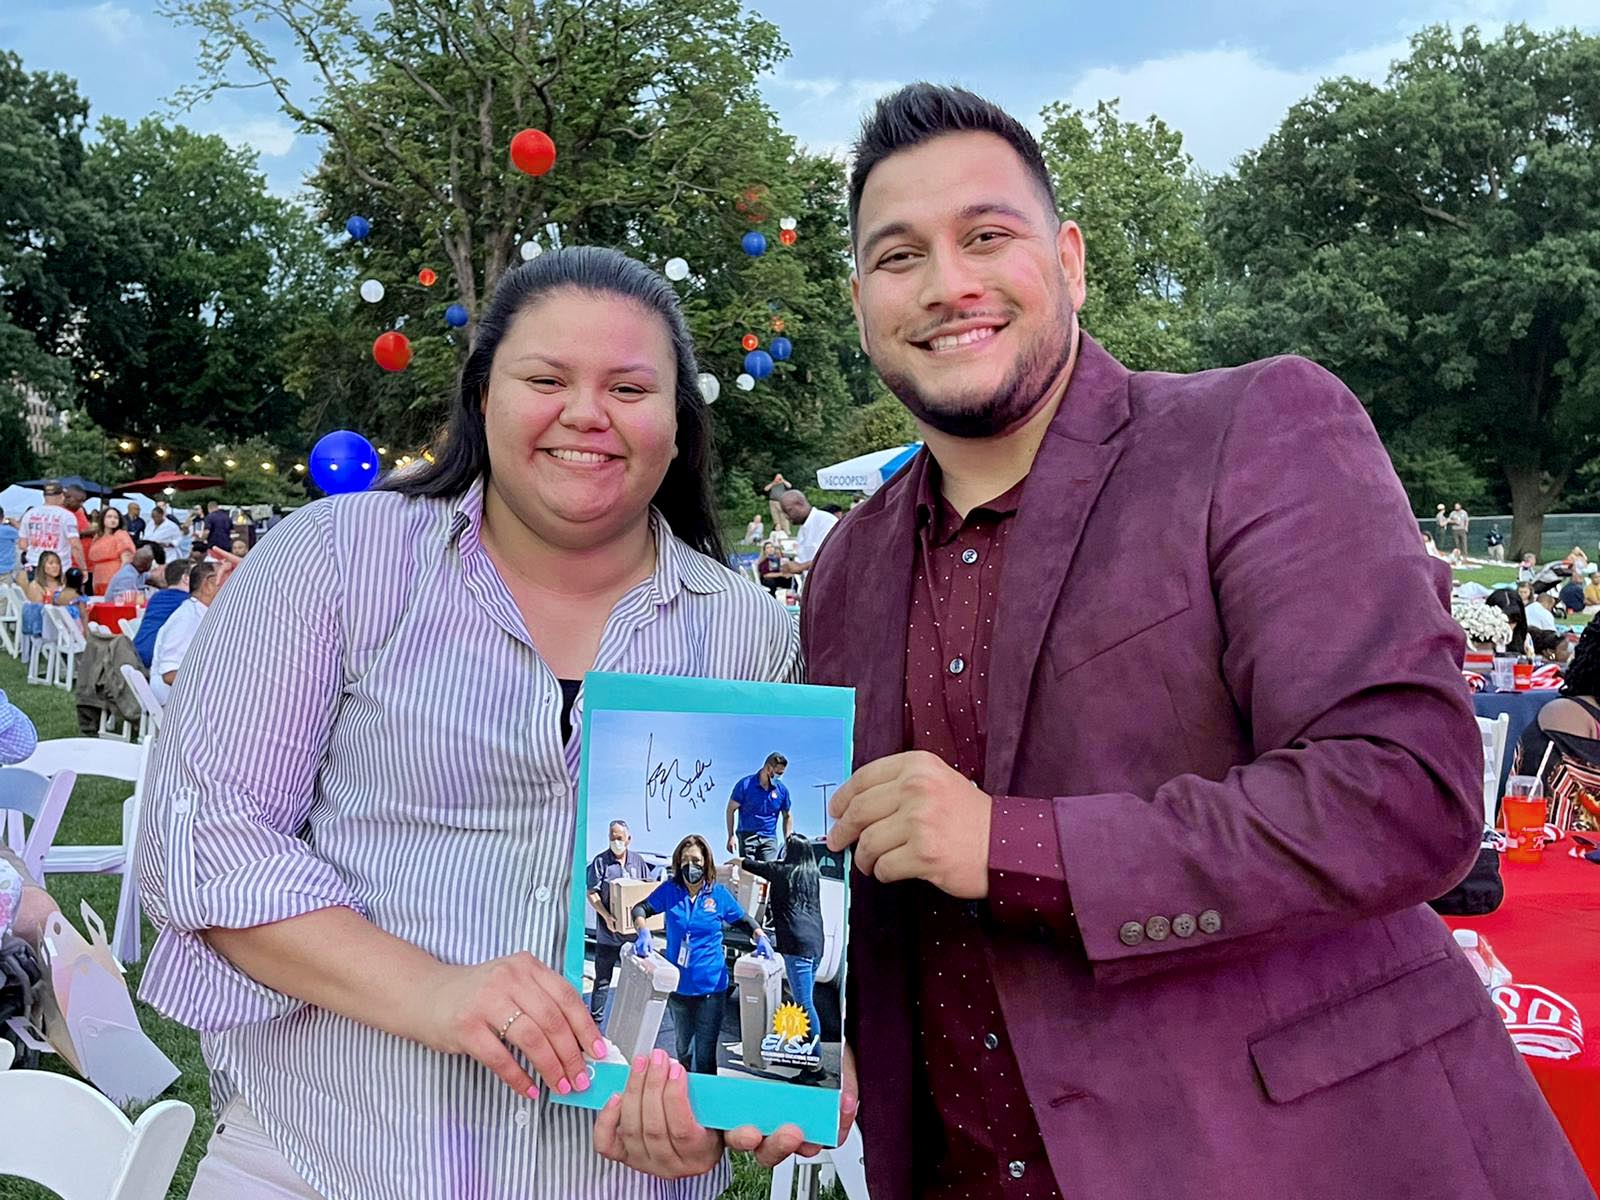 Joanina Gazcon and Natanael Chavez, COVID-19 outreach lead of El Sol, visit The White House on July 4, 2021, in celebration of having more than 50 percent of the U.S. vaccinated.